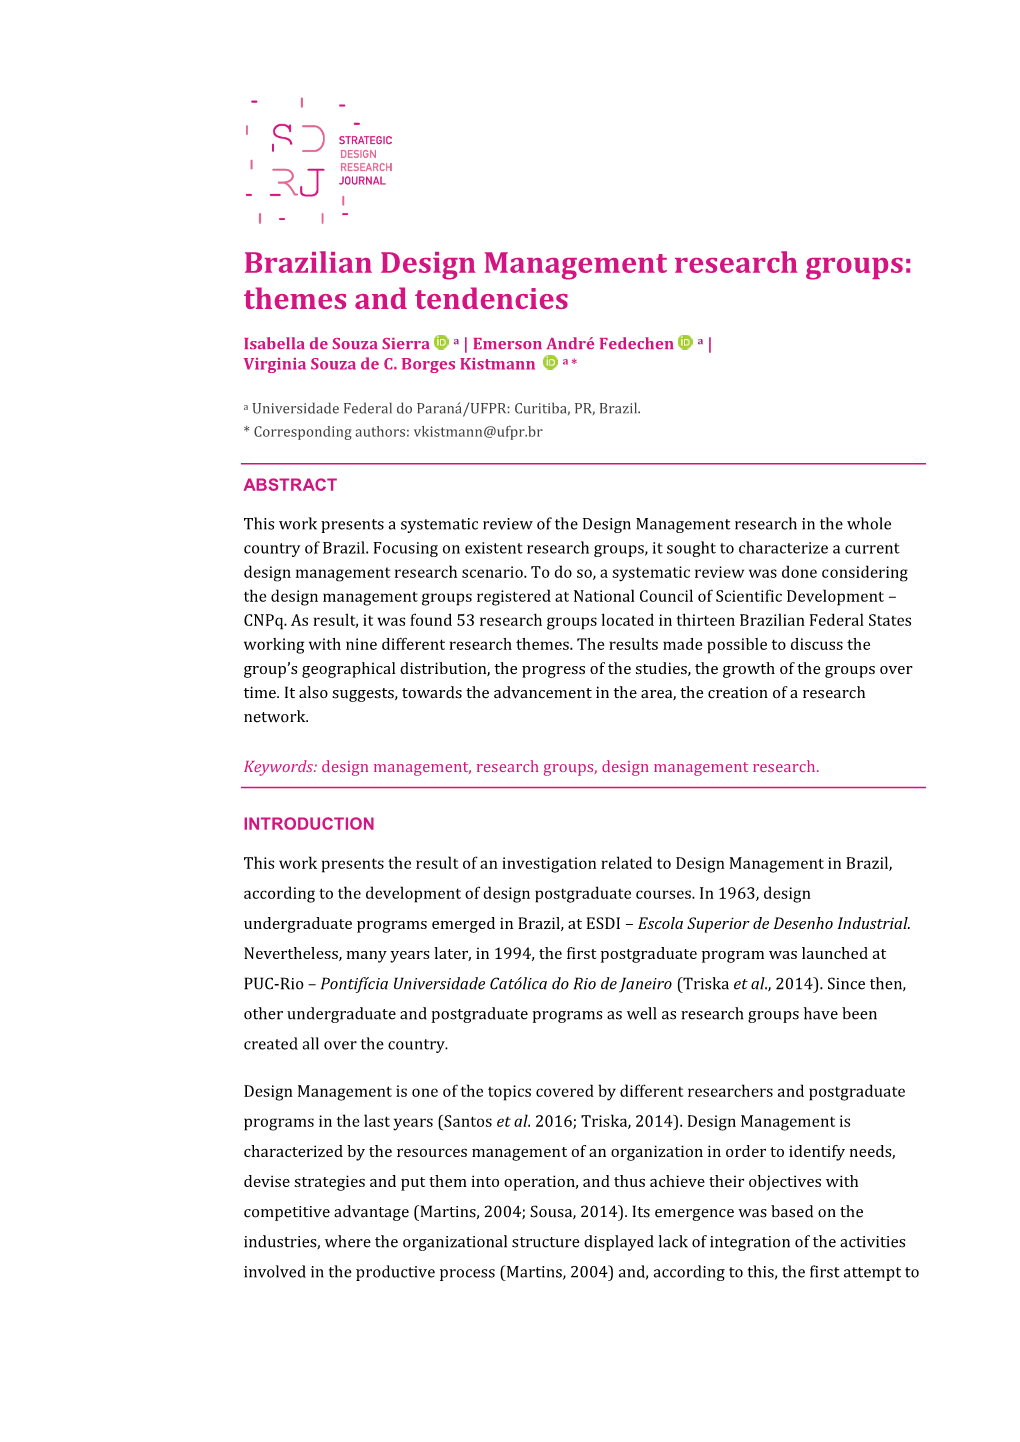 Brazilian Design Management Research Groups: Themes and Tendencies